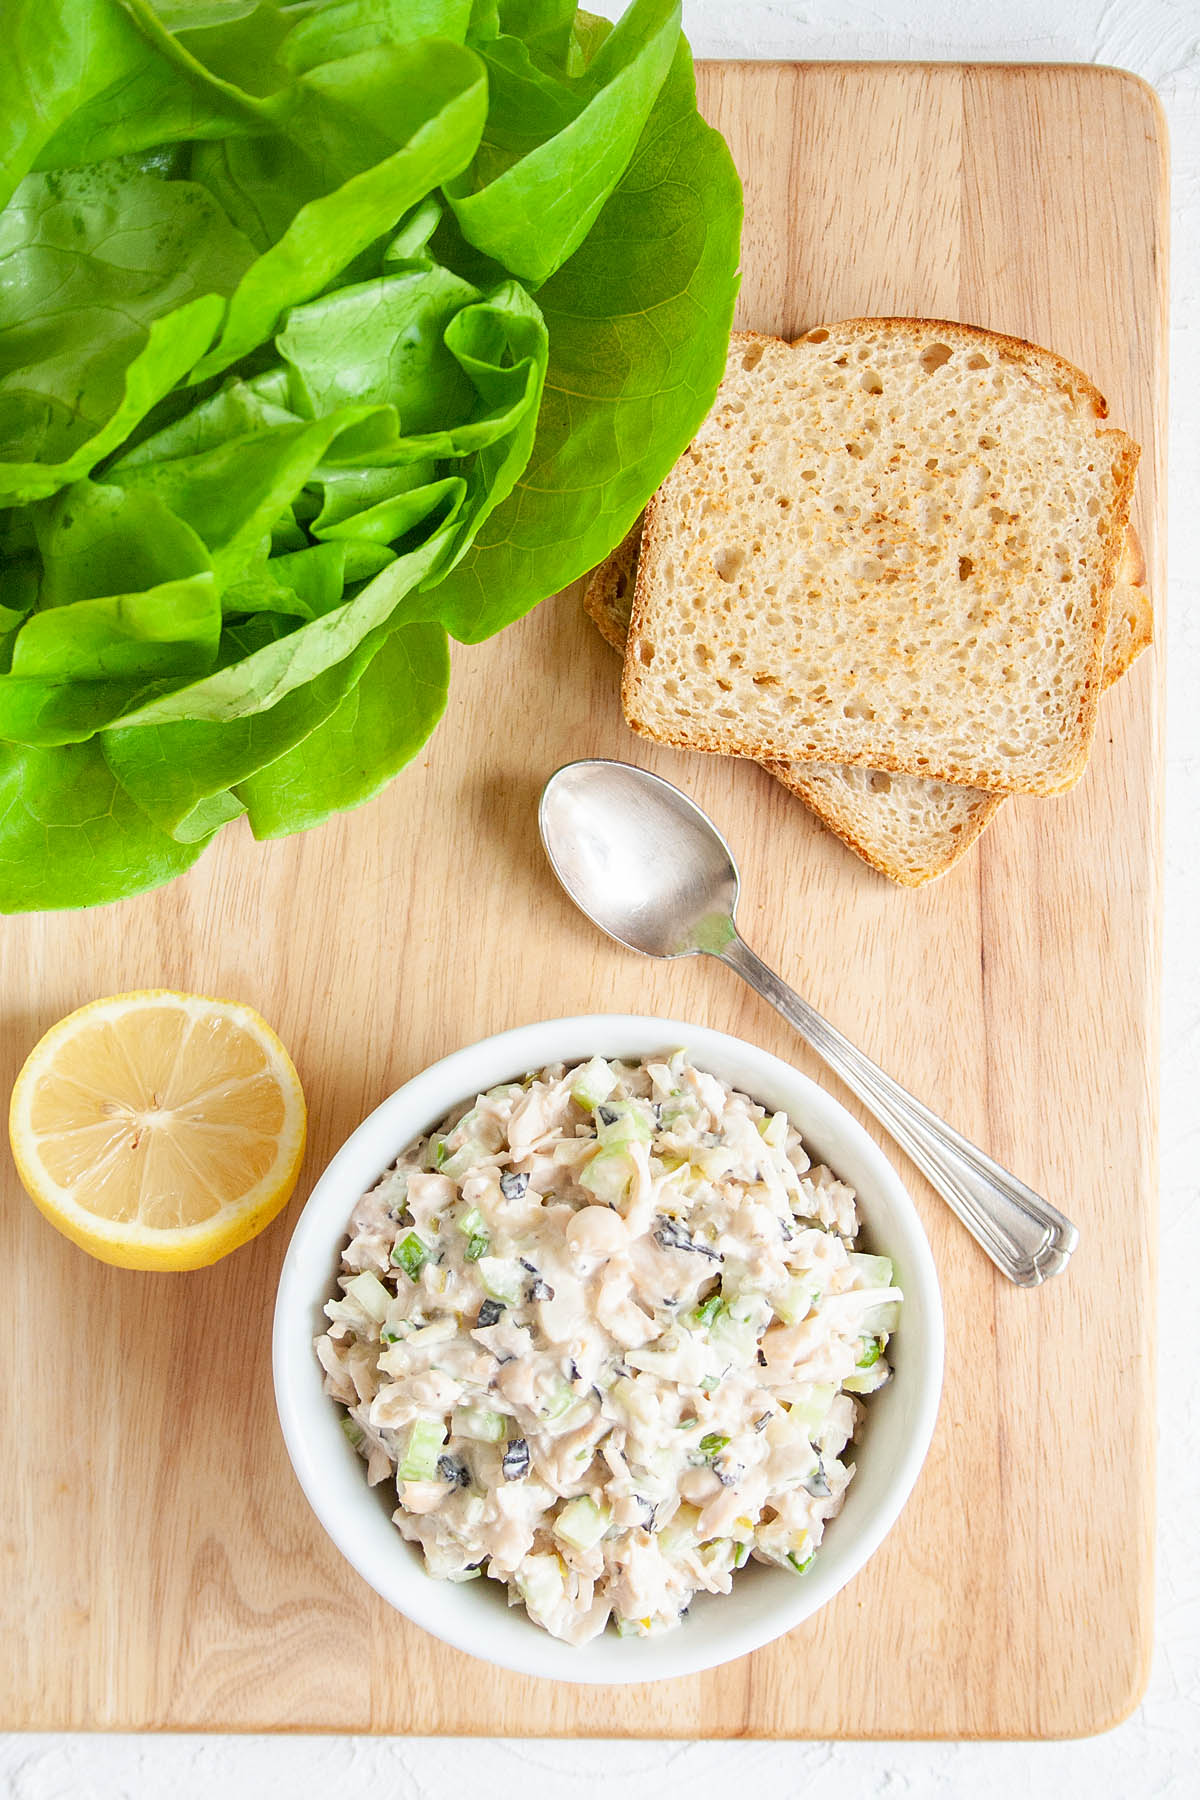 Vegan Tuna Salad in a bowl with toast, butter lettuce, and a lemon.